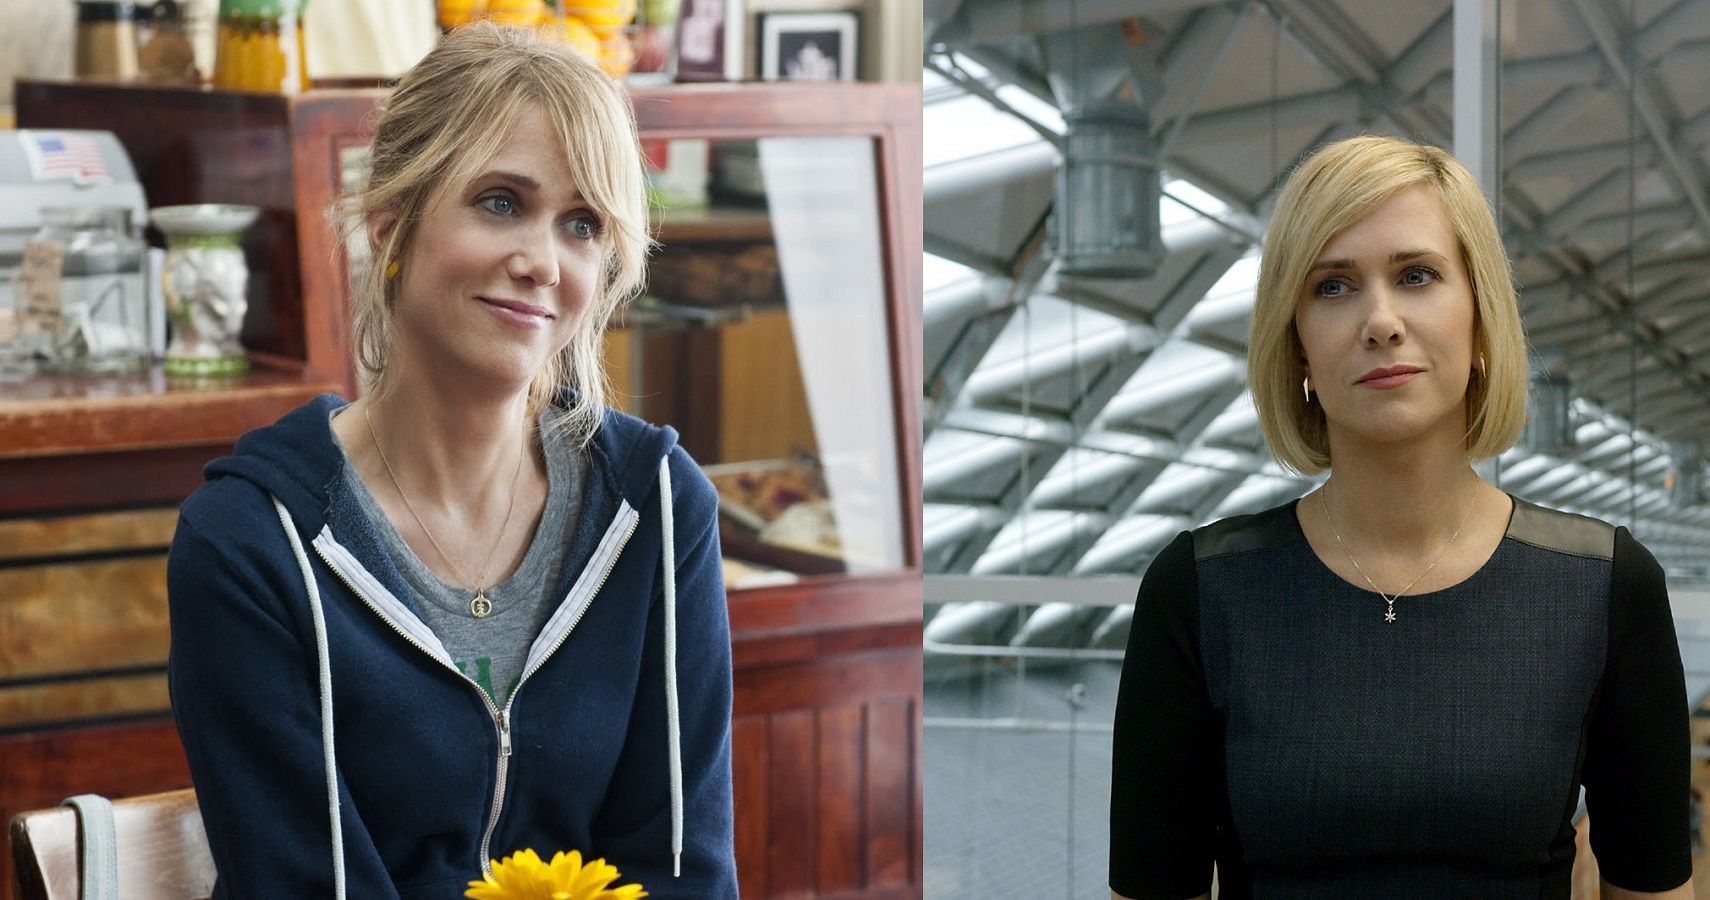 Kristen Wiig’s New Apple TV Show Could Be The Perfect White Lotus Replacement